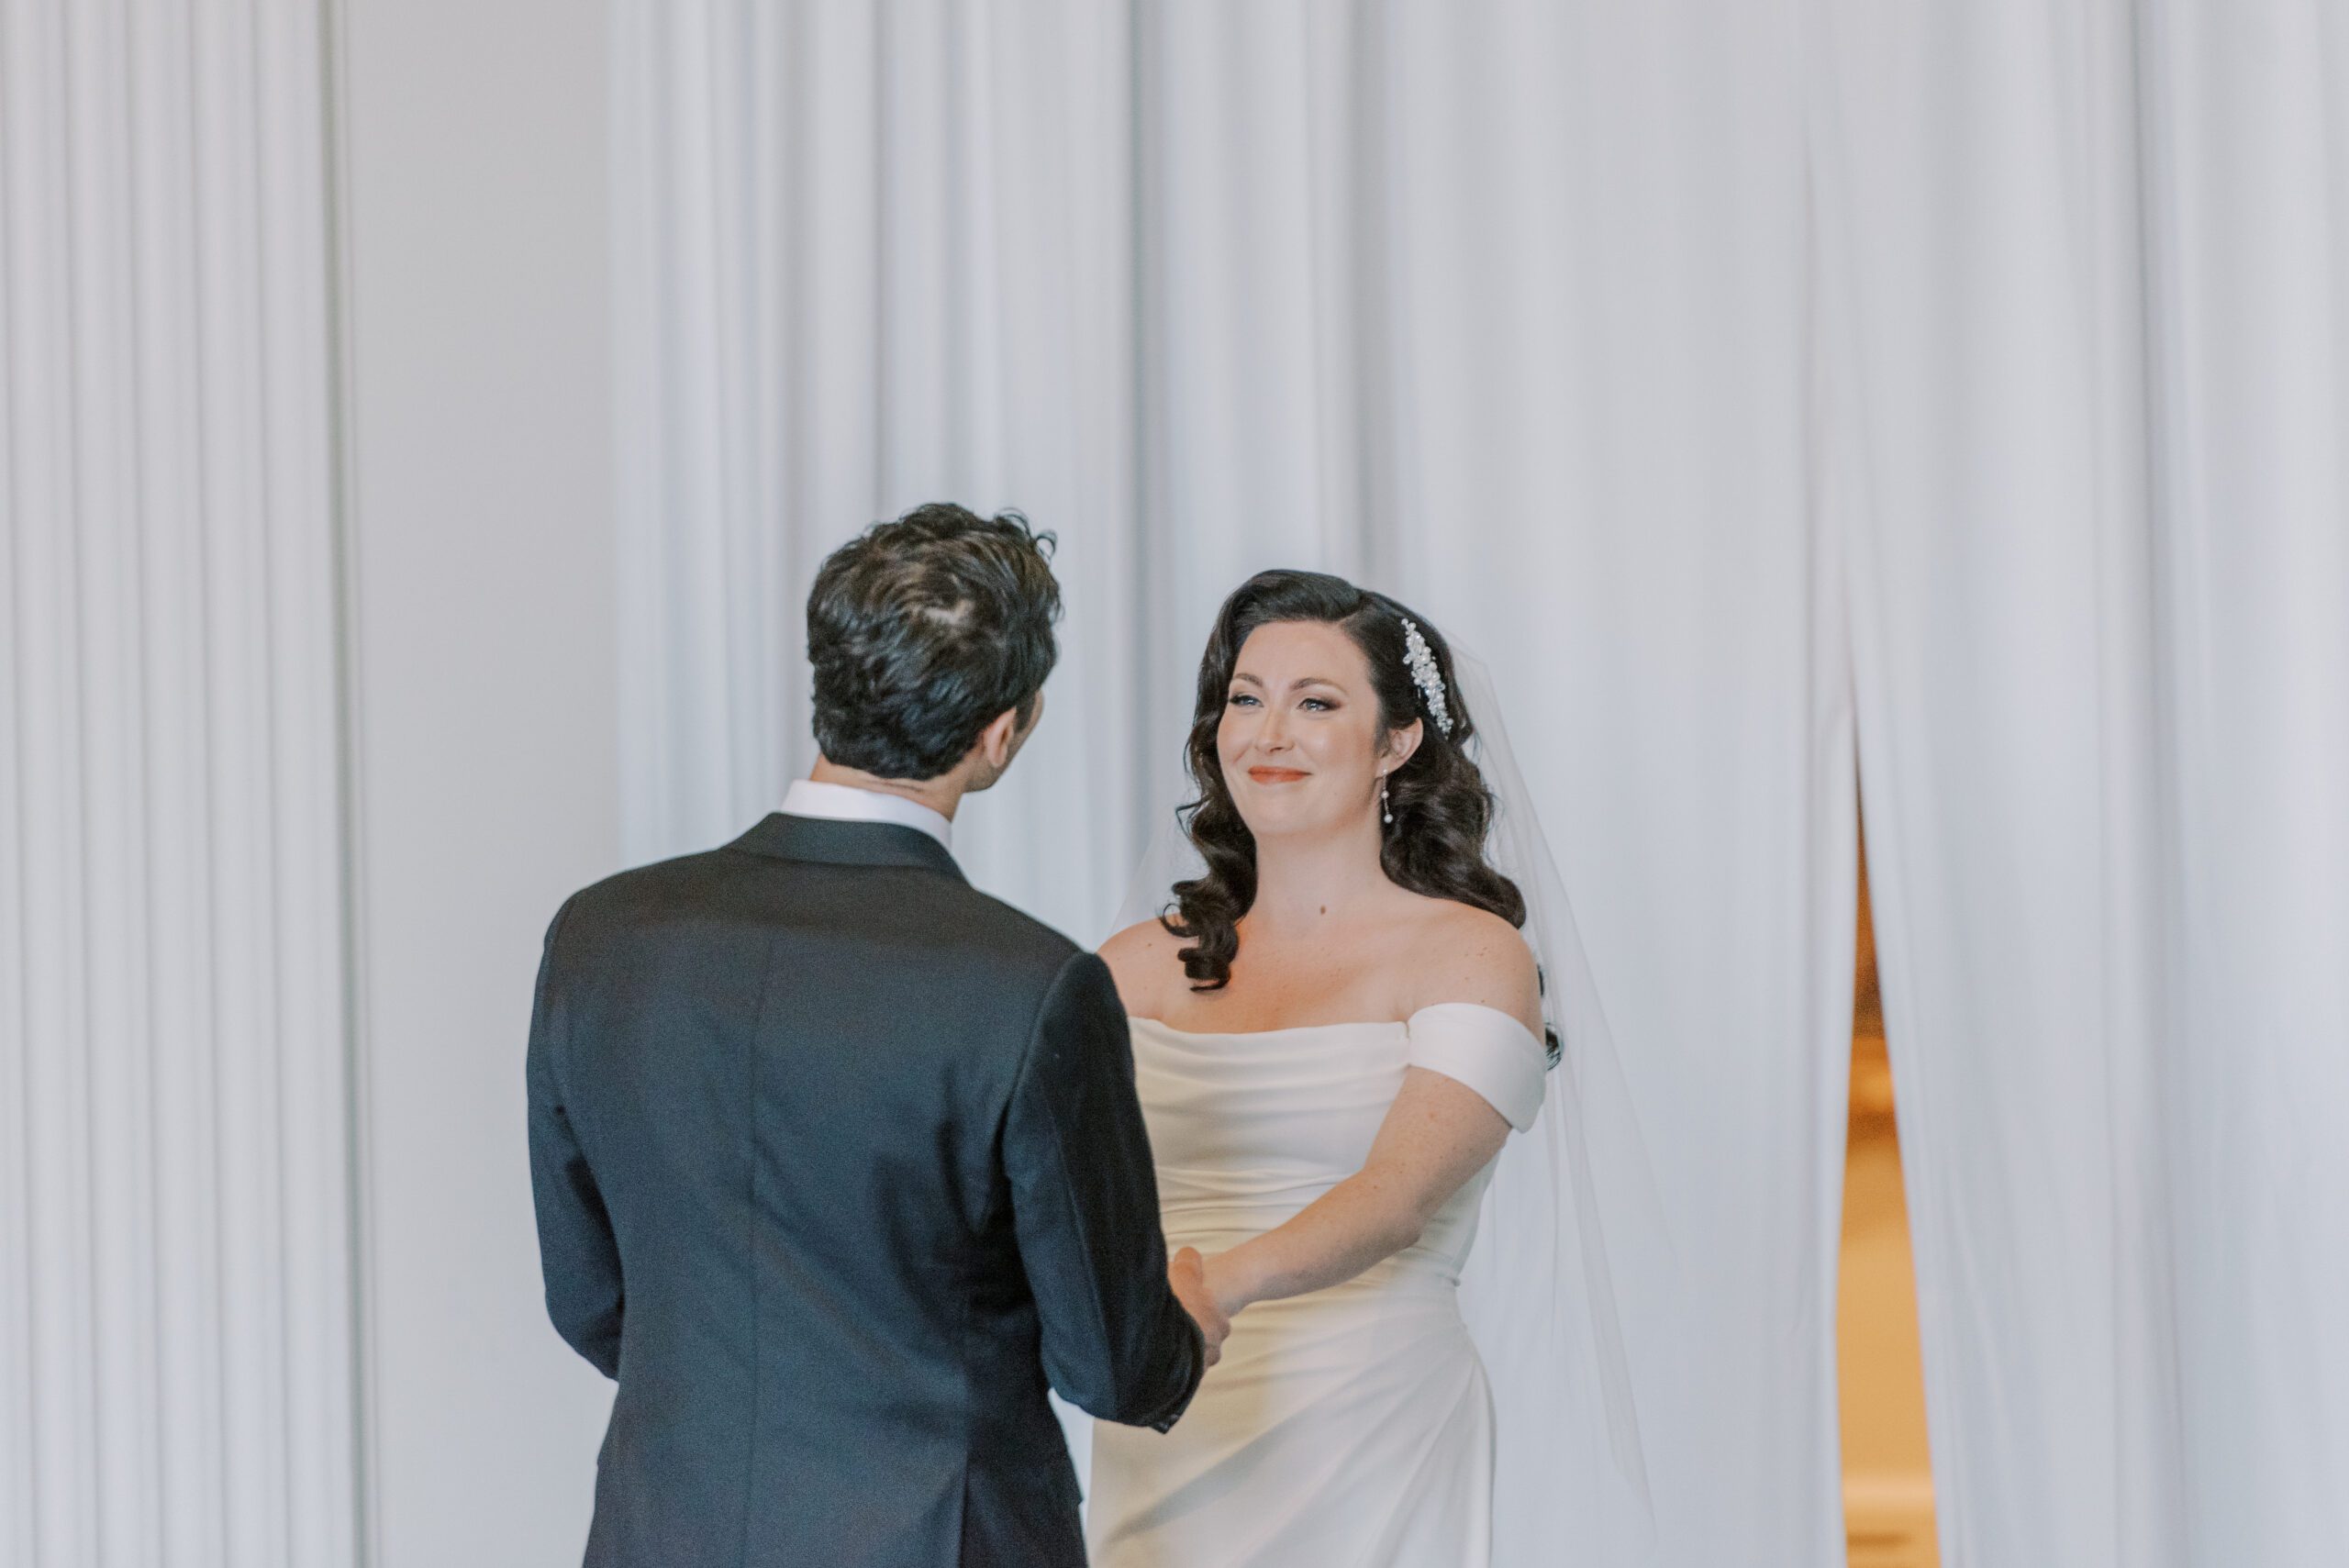 Emotional photo of bride as she sees the groom face to face for the first time on their wedding day at vmfa, groom facing away from camera to look at bride